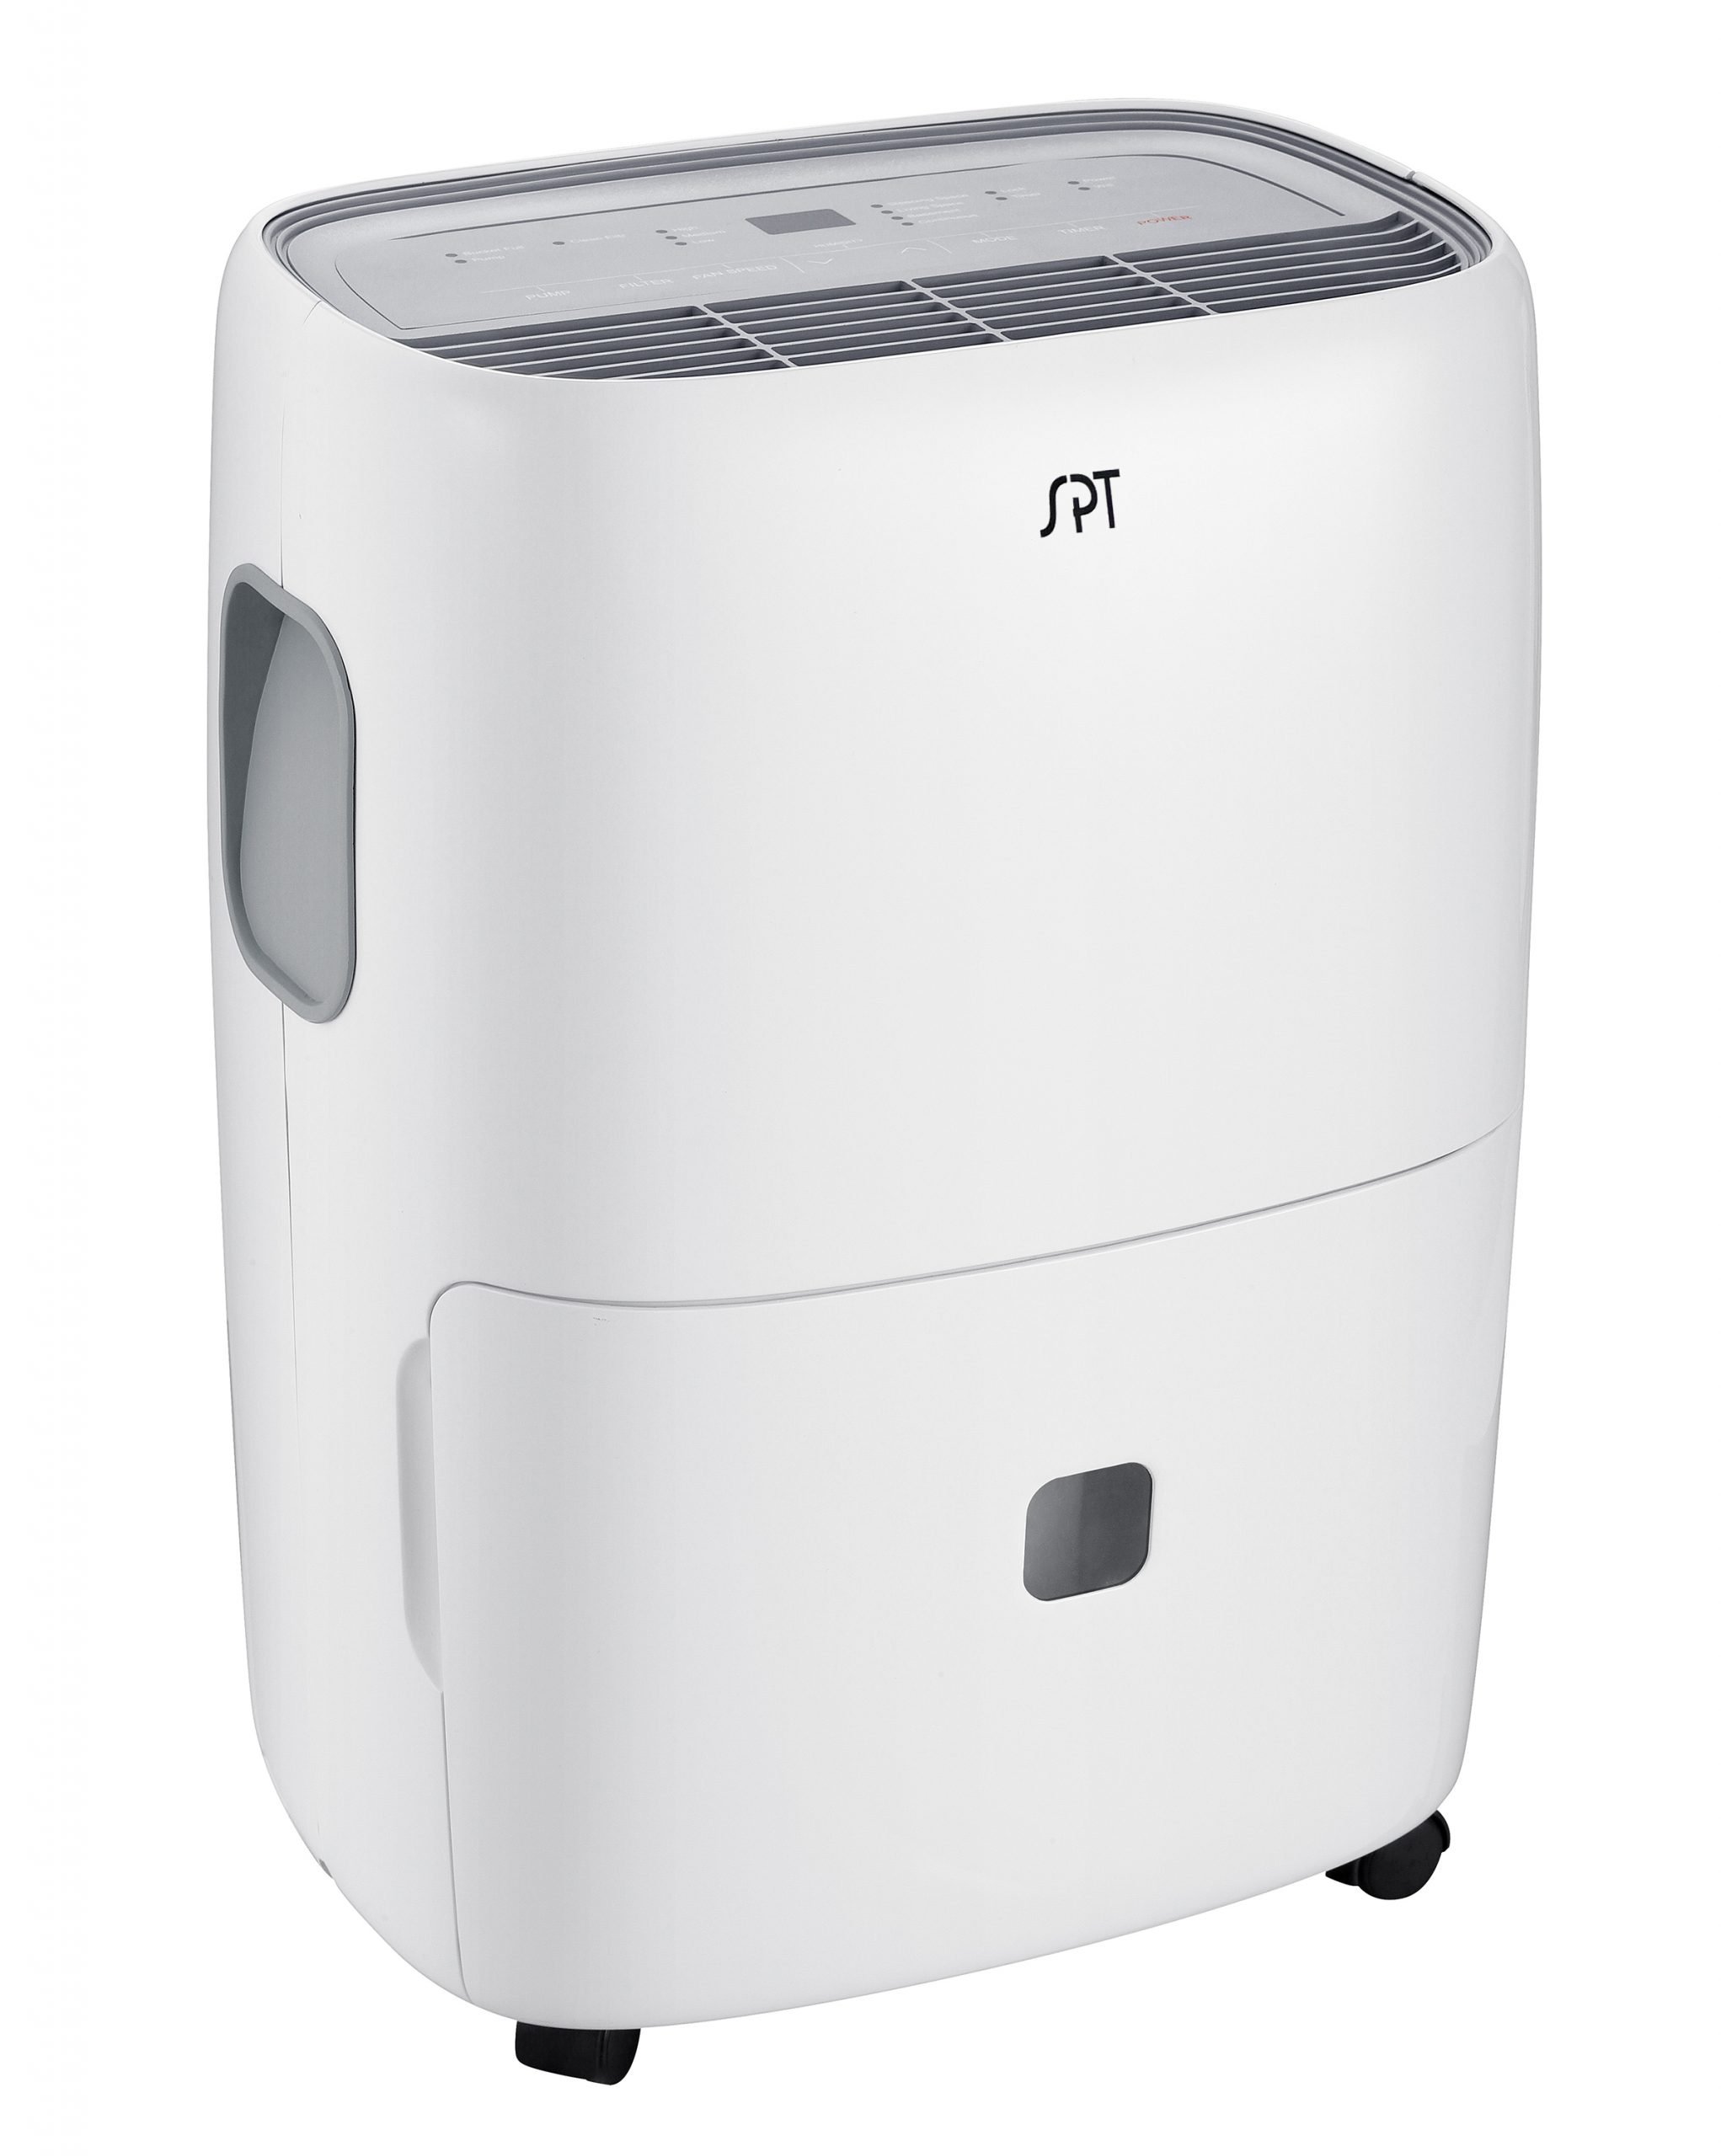 SPT 50-Pine Dehumidifier with Energy Star and Built-In Pump